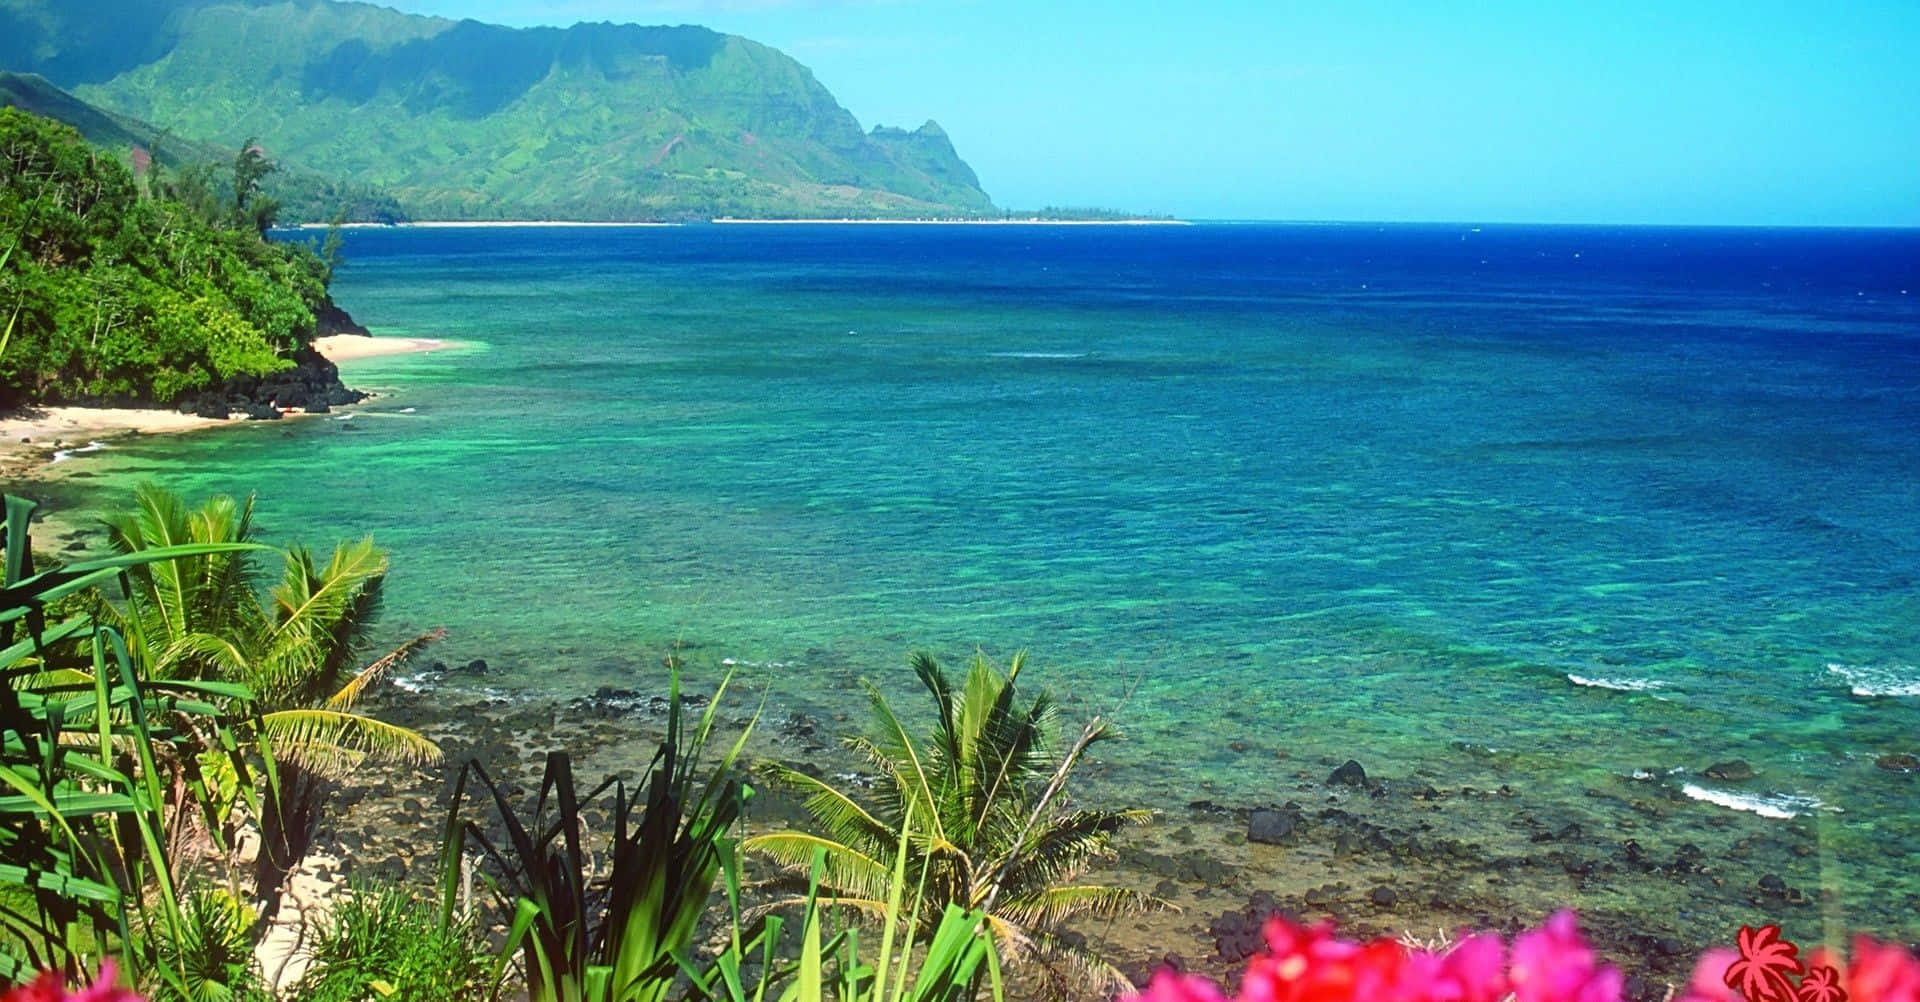 “Enjoy the surf and sand of Hawaii’s beautiful beaches.” Wallpaper